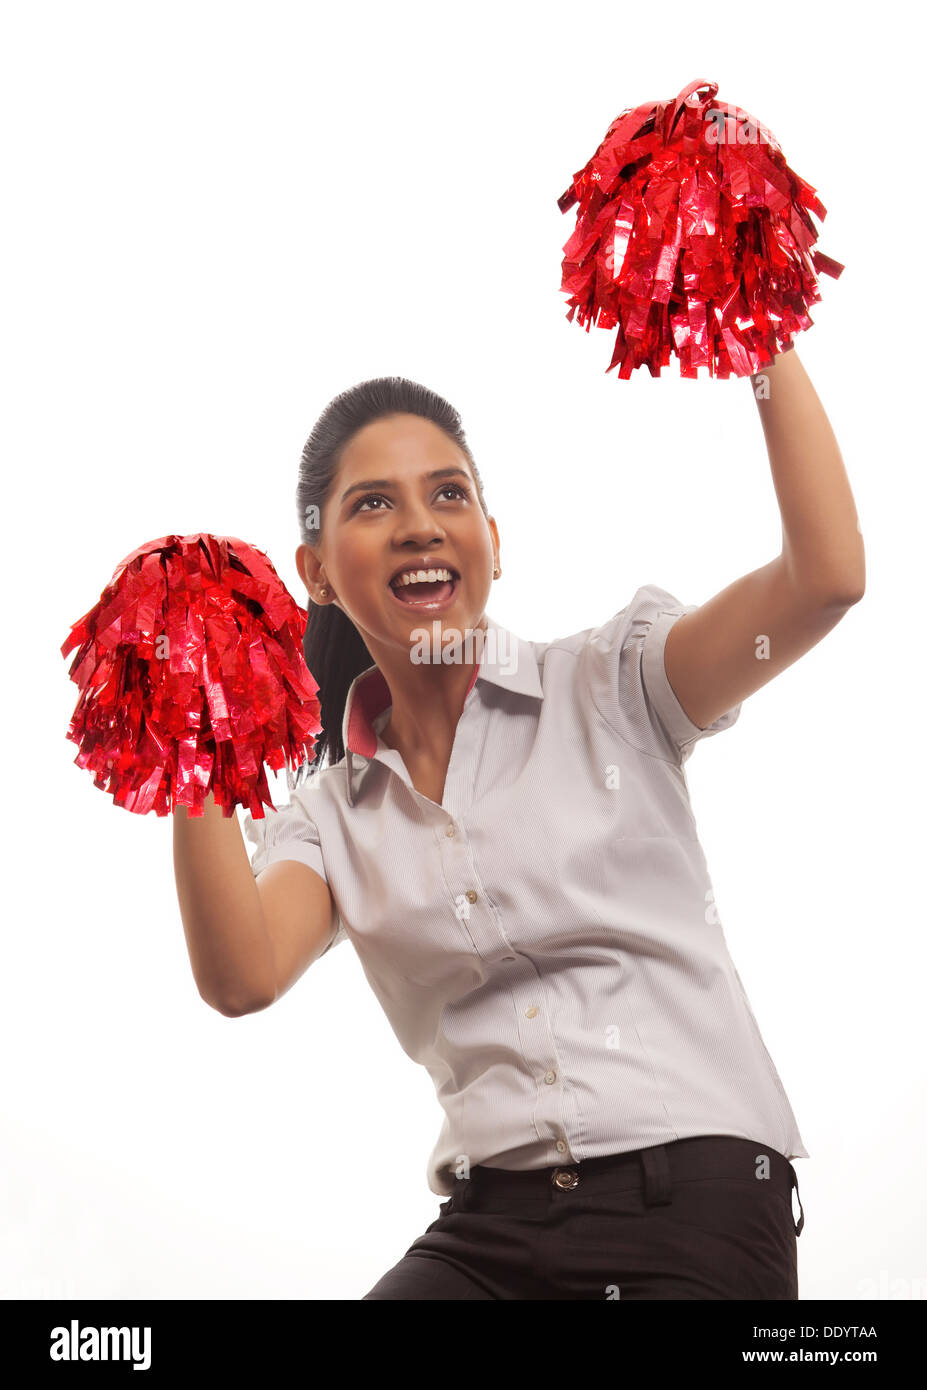 Cheerleading pom poms Cut Out Stock Images & Pictures - Alamy